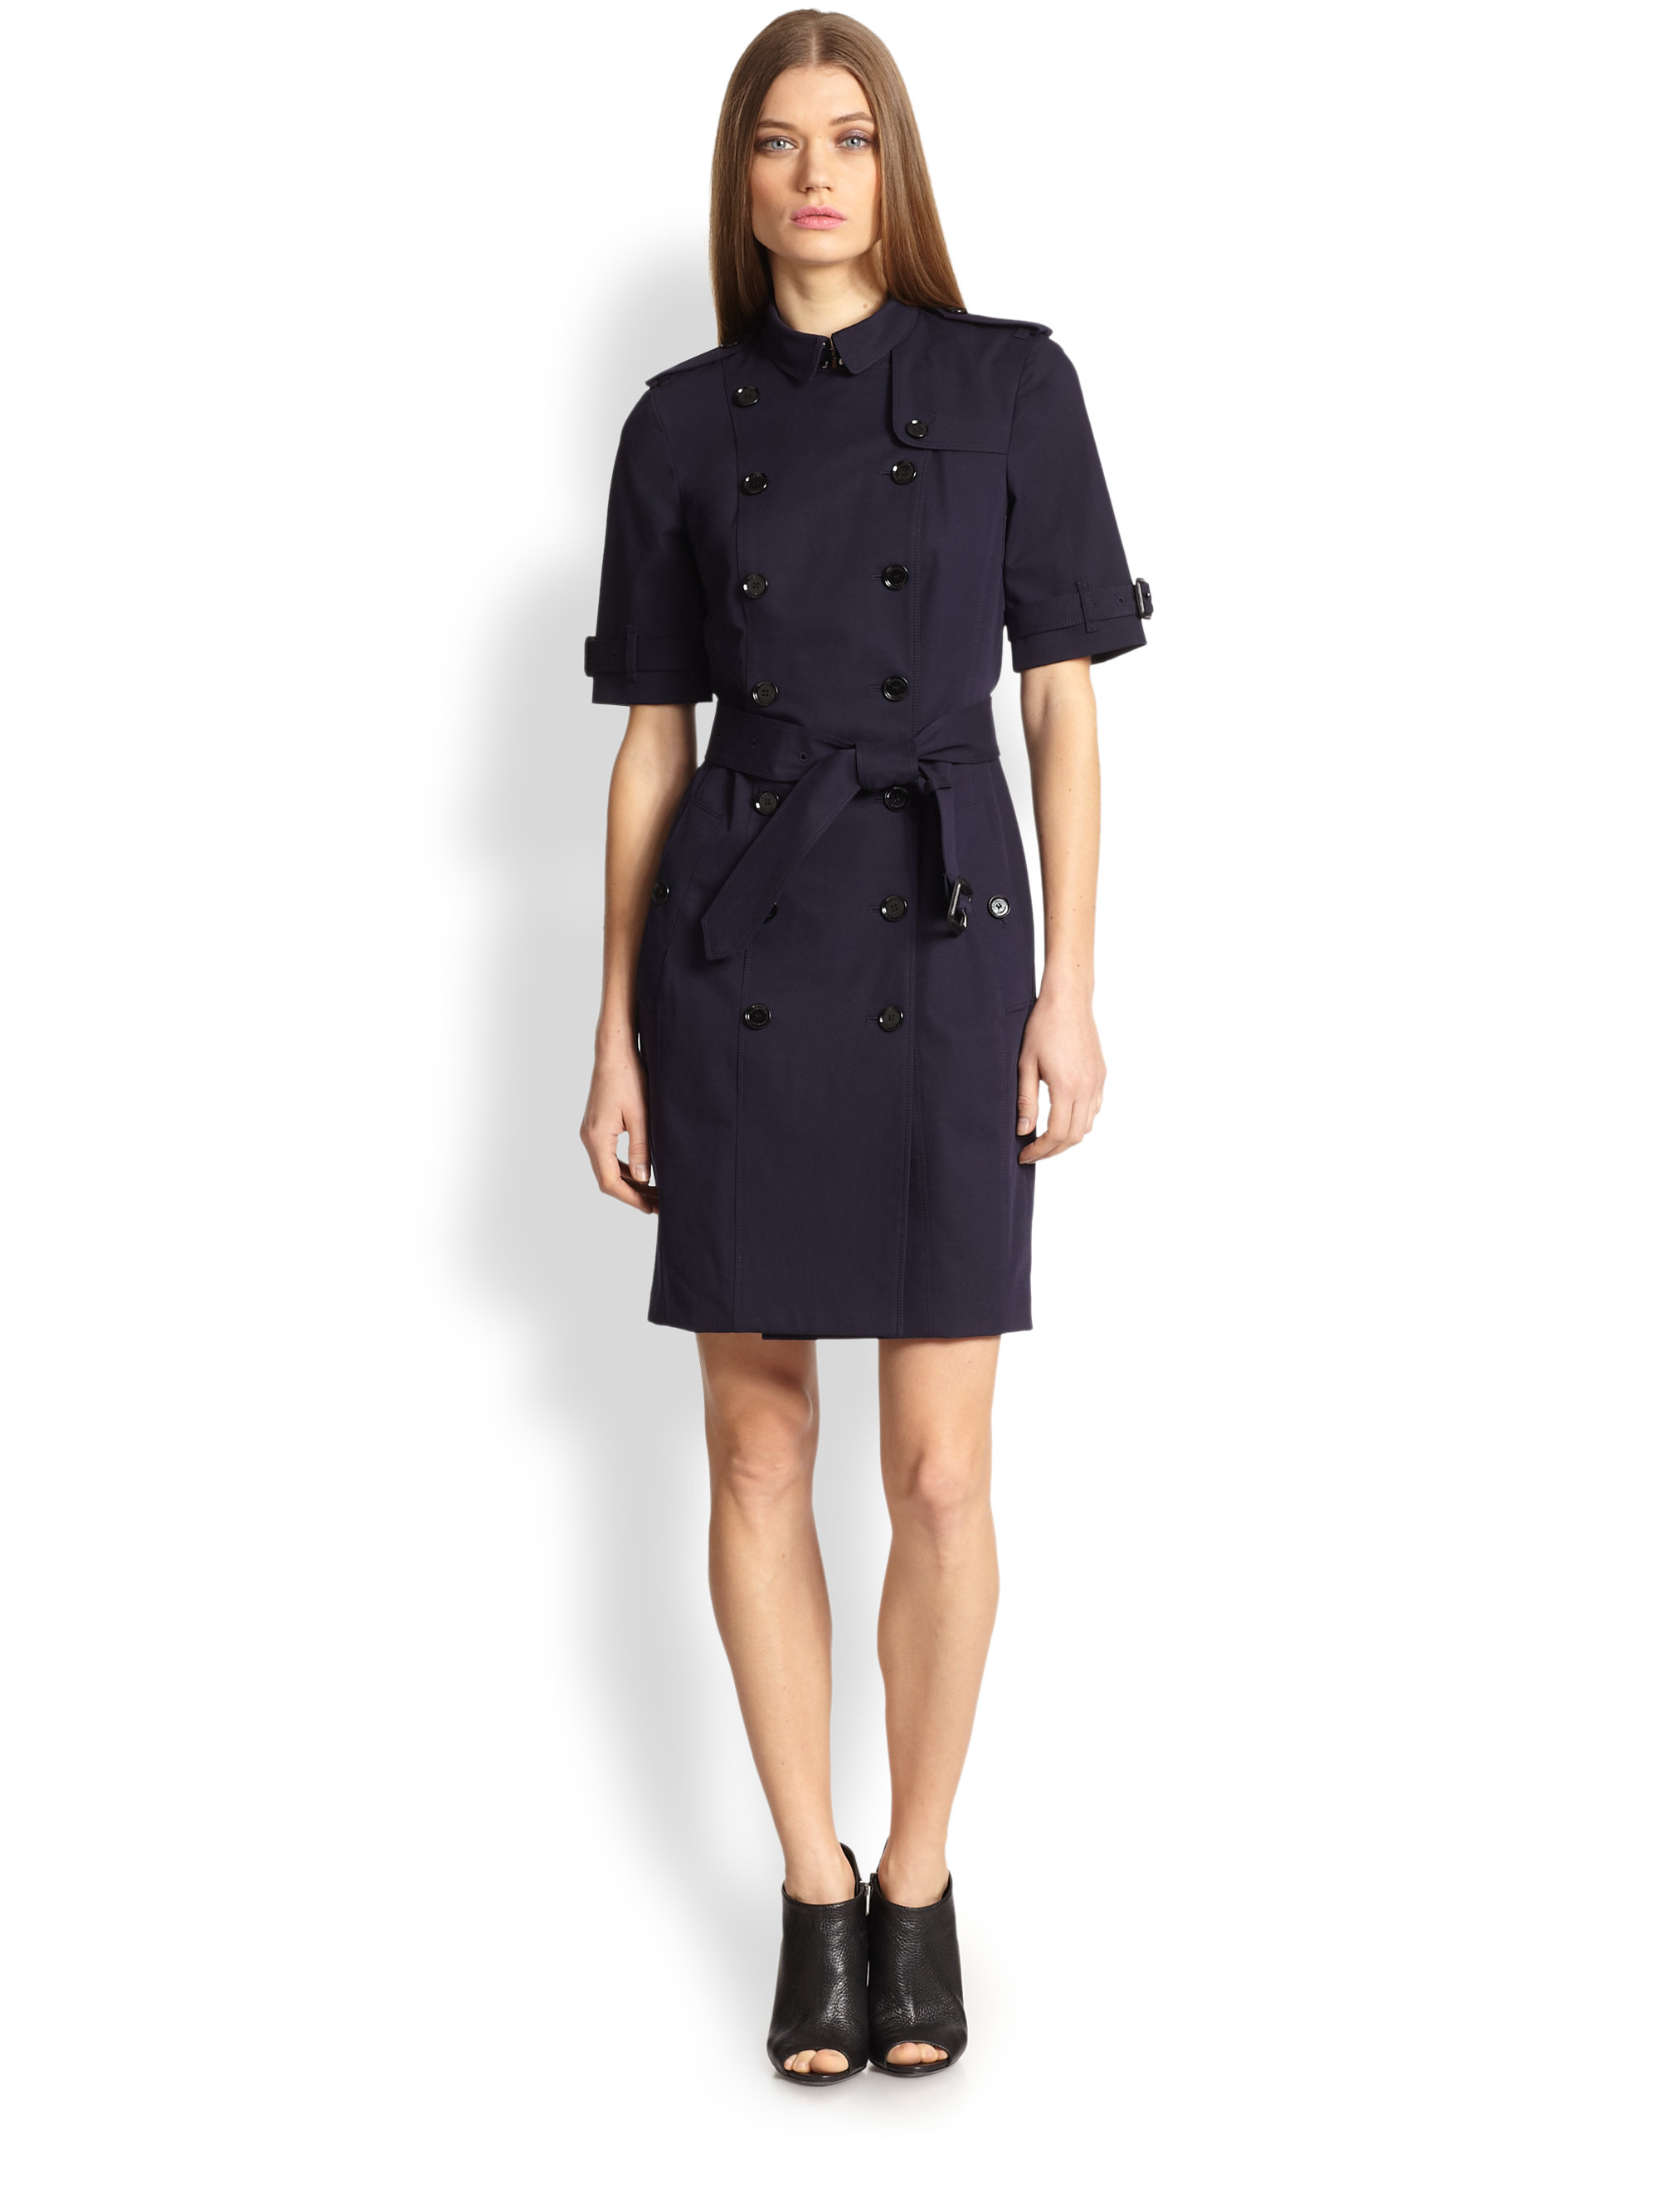 burberry trench dress